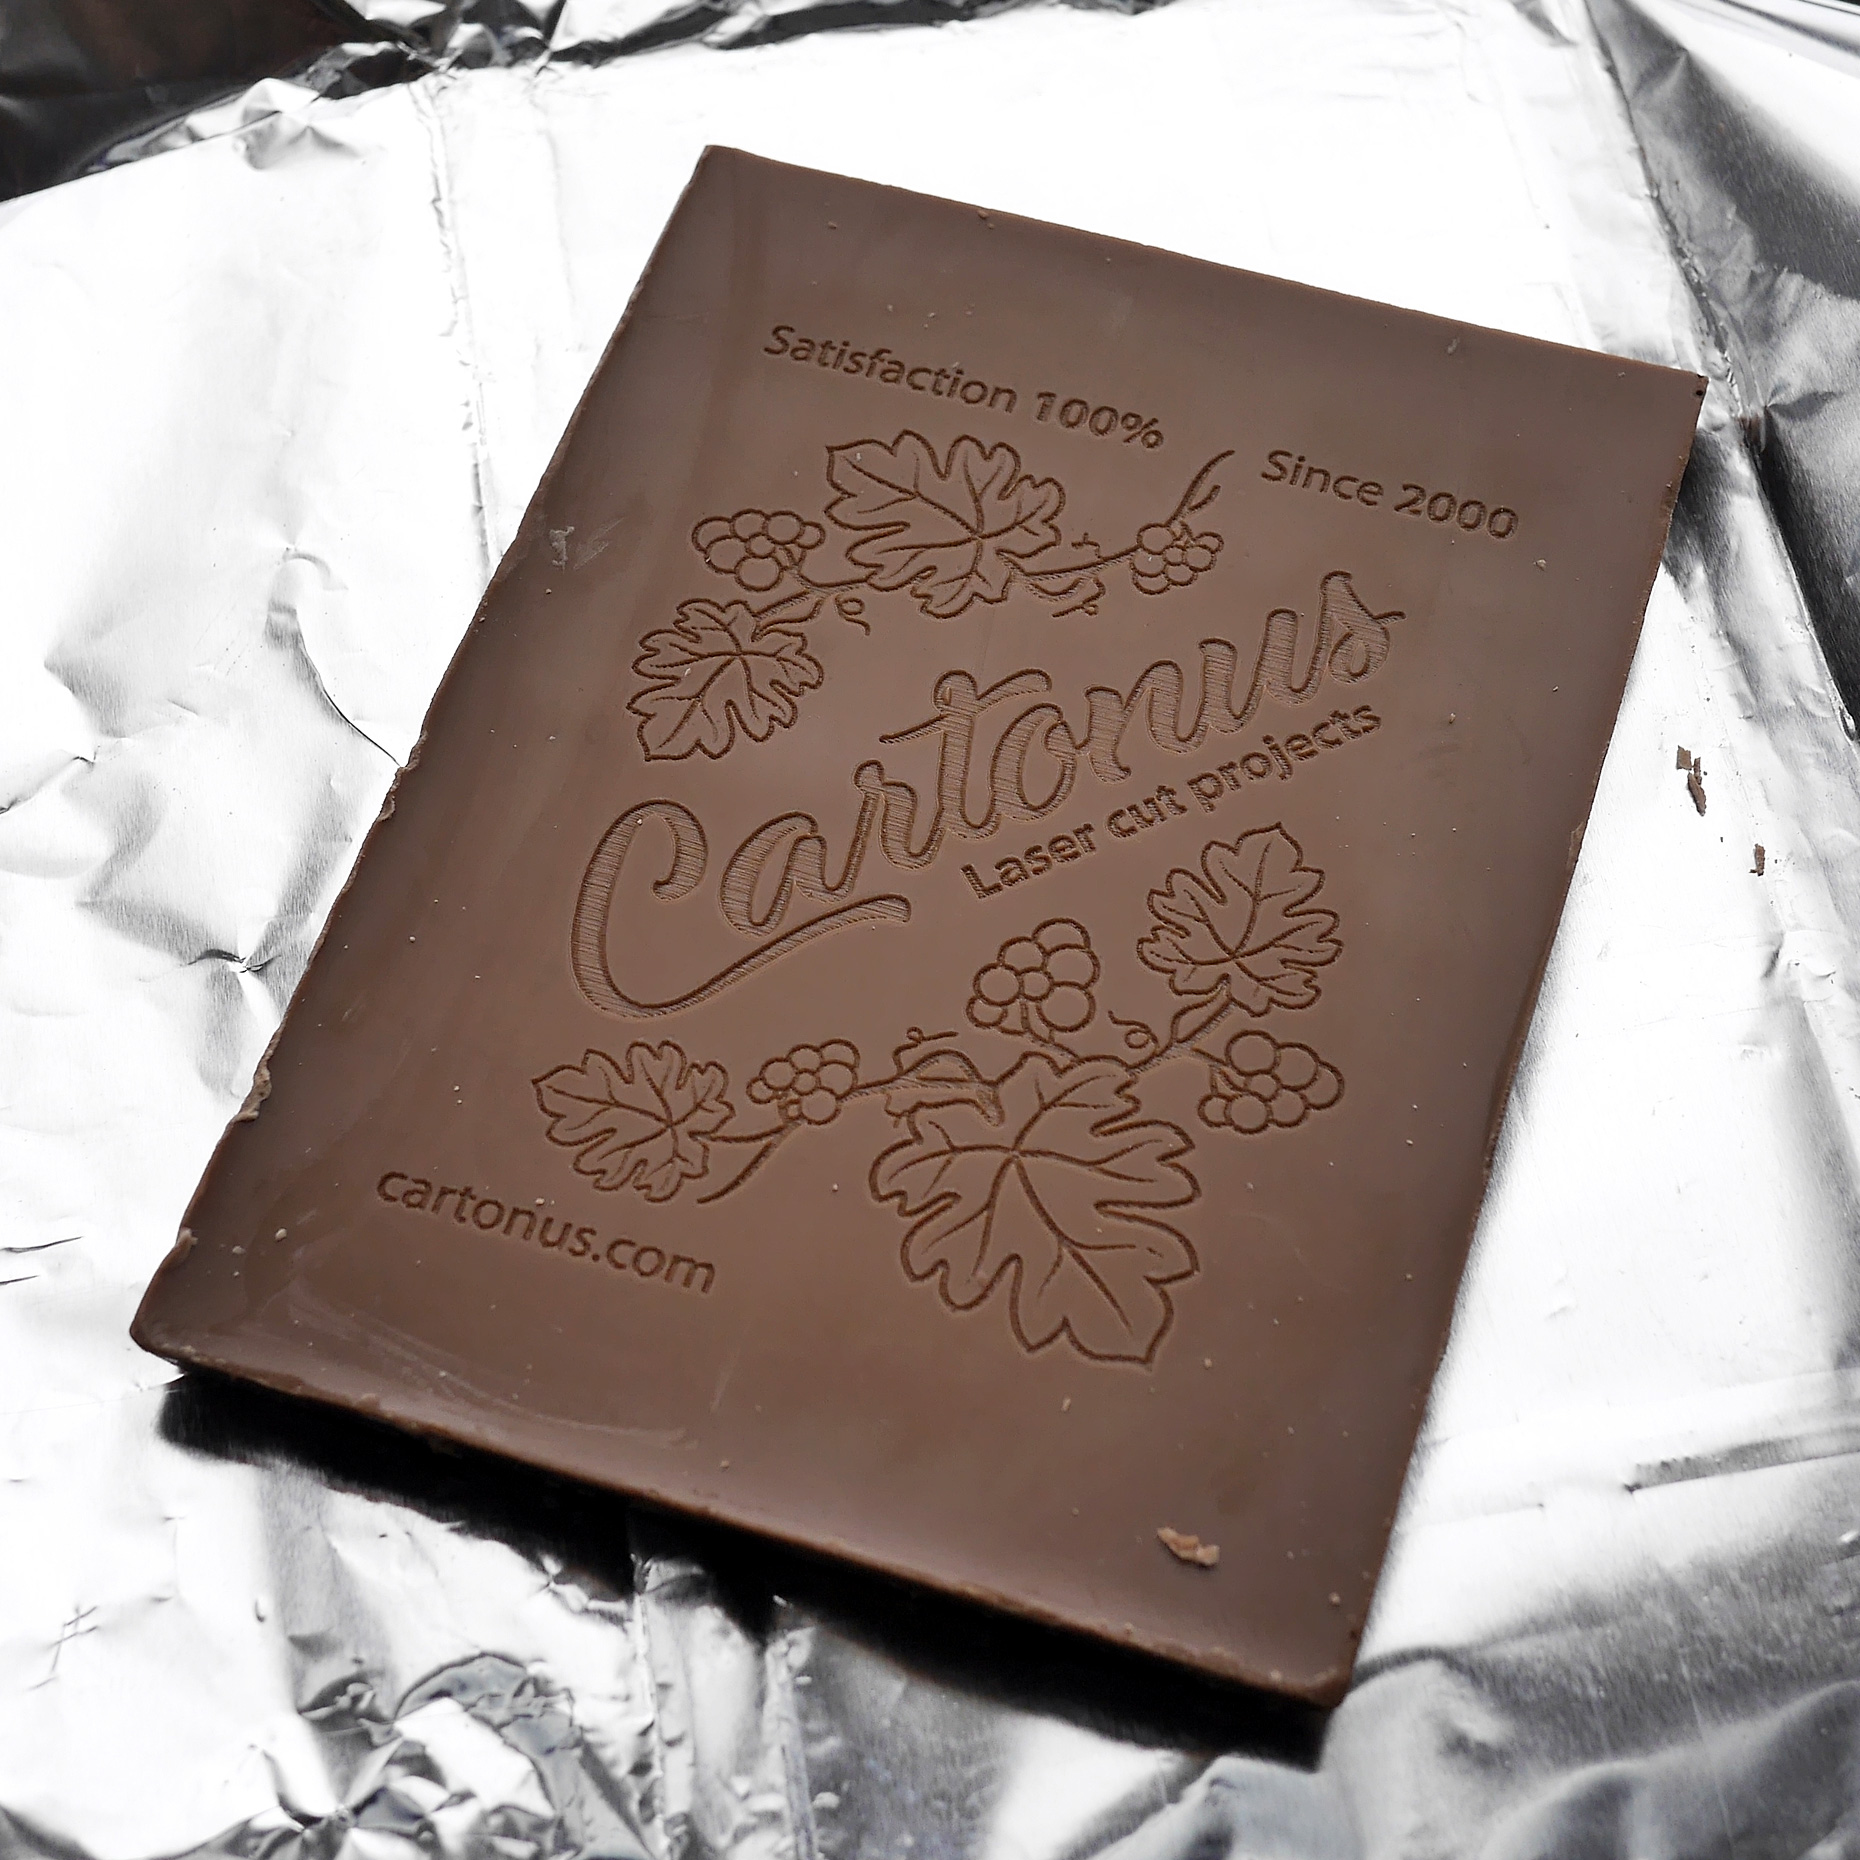 How-to: Laser engraving chocolate with laser engraver